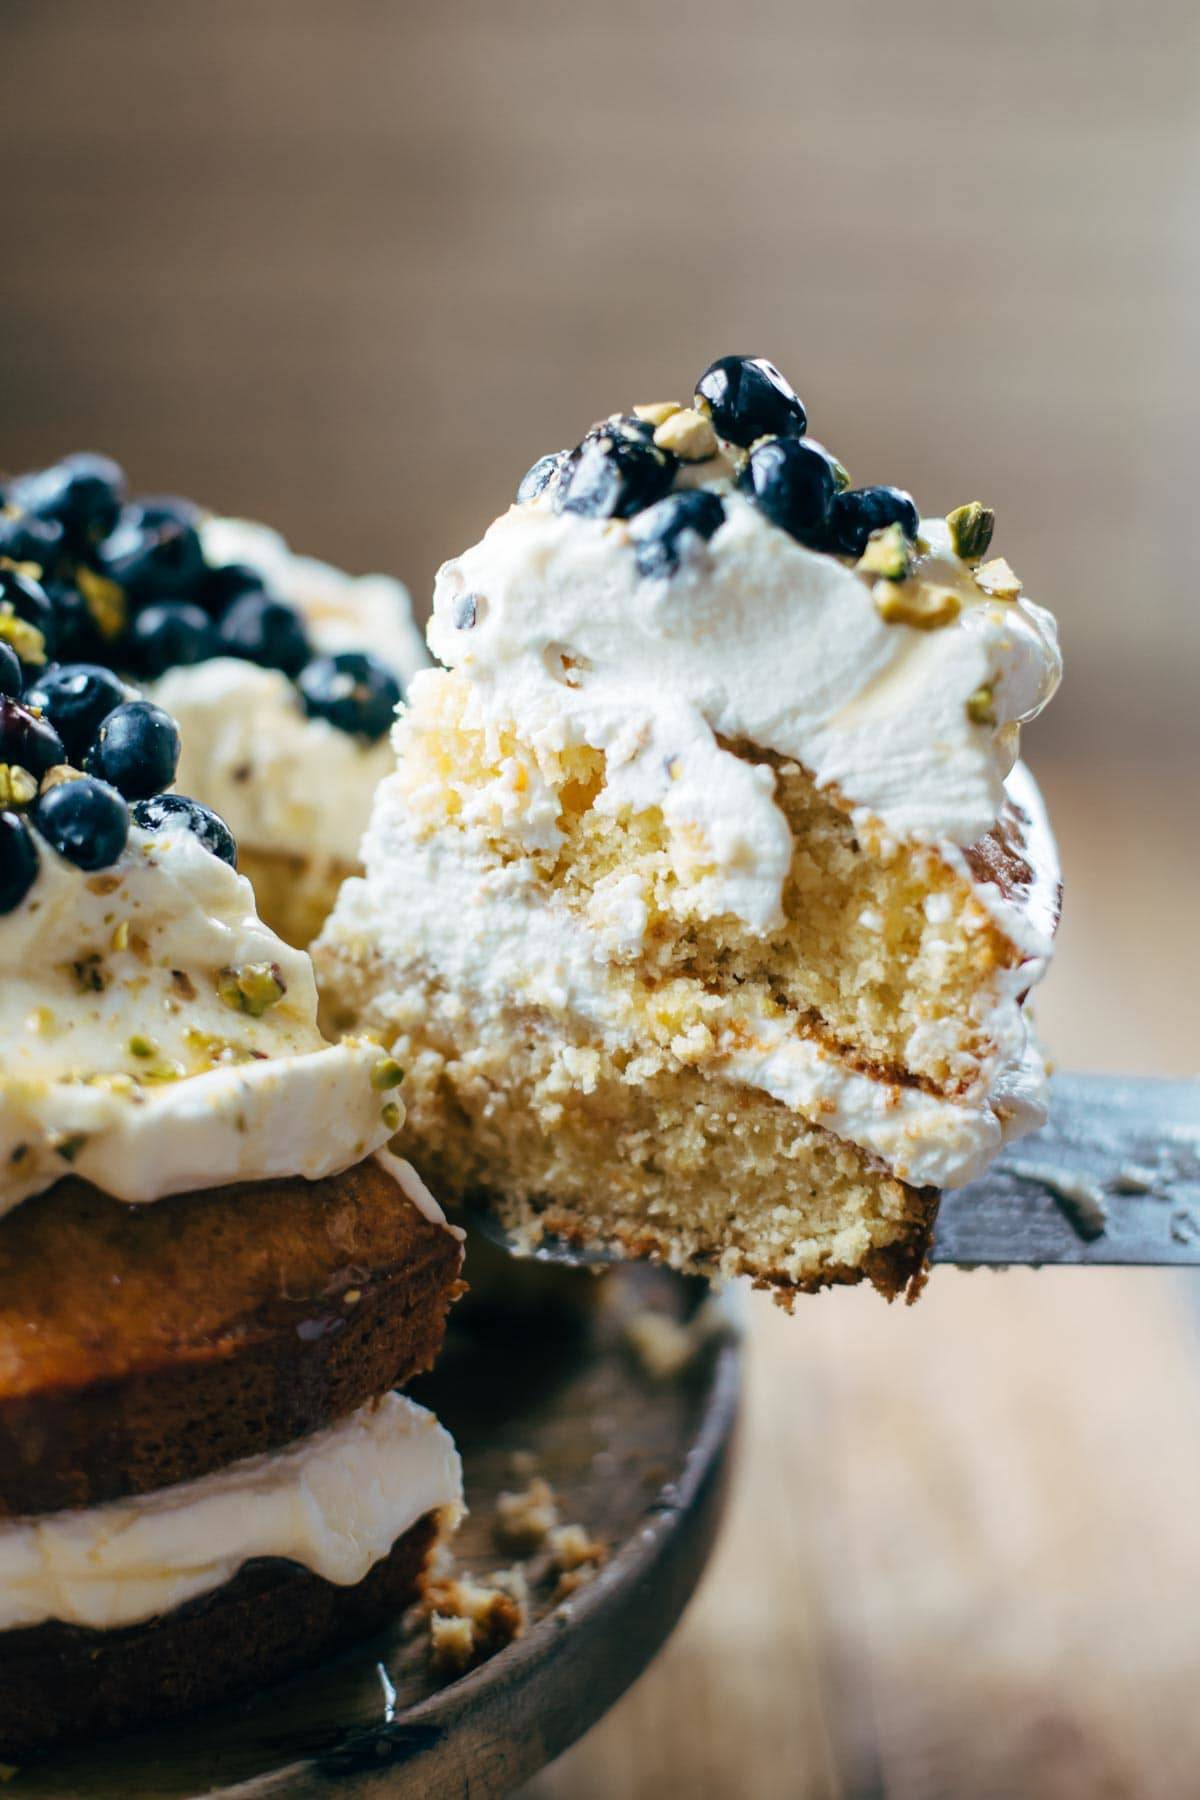 Orange Brunch Cake - SUPER YUMMY because it's made with olive oil and whole oranges! topped with whipped cream and blueberries and you're in fancy brunch business. | pinchofyum.com